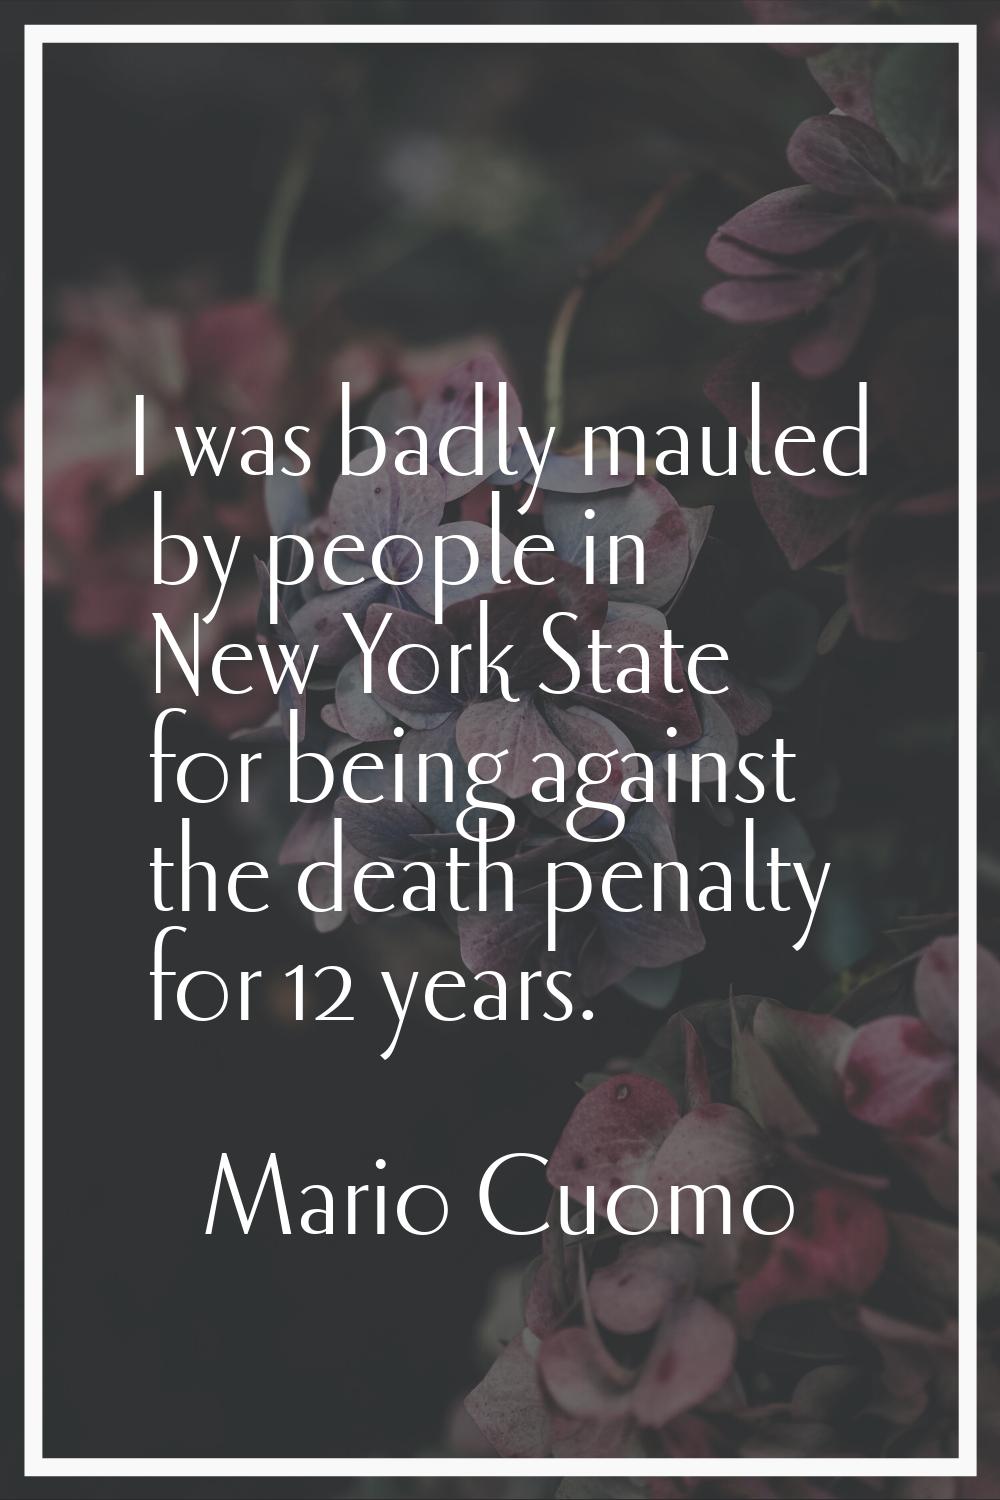 I was badly mauled by people in New York State for being against the death penalty for 12 years.